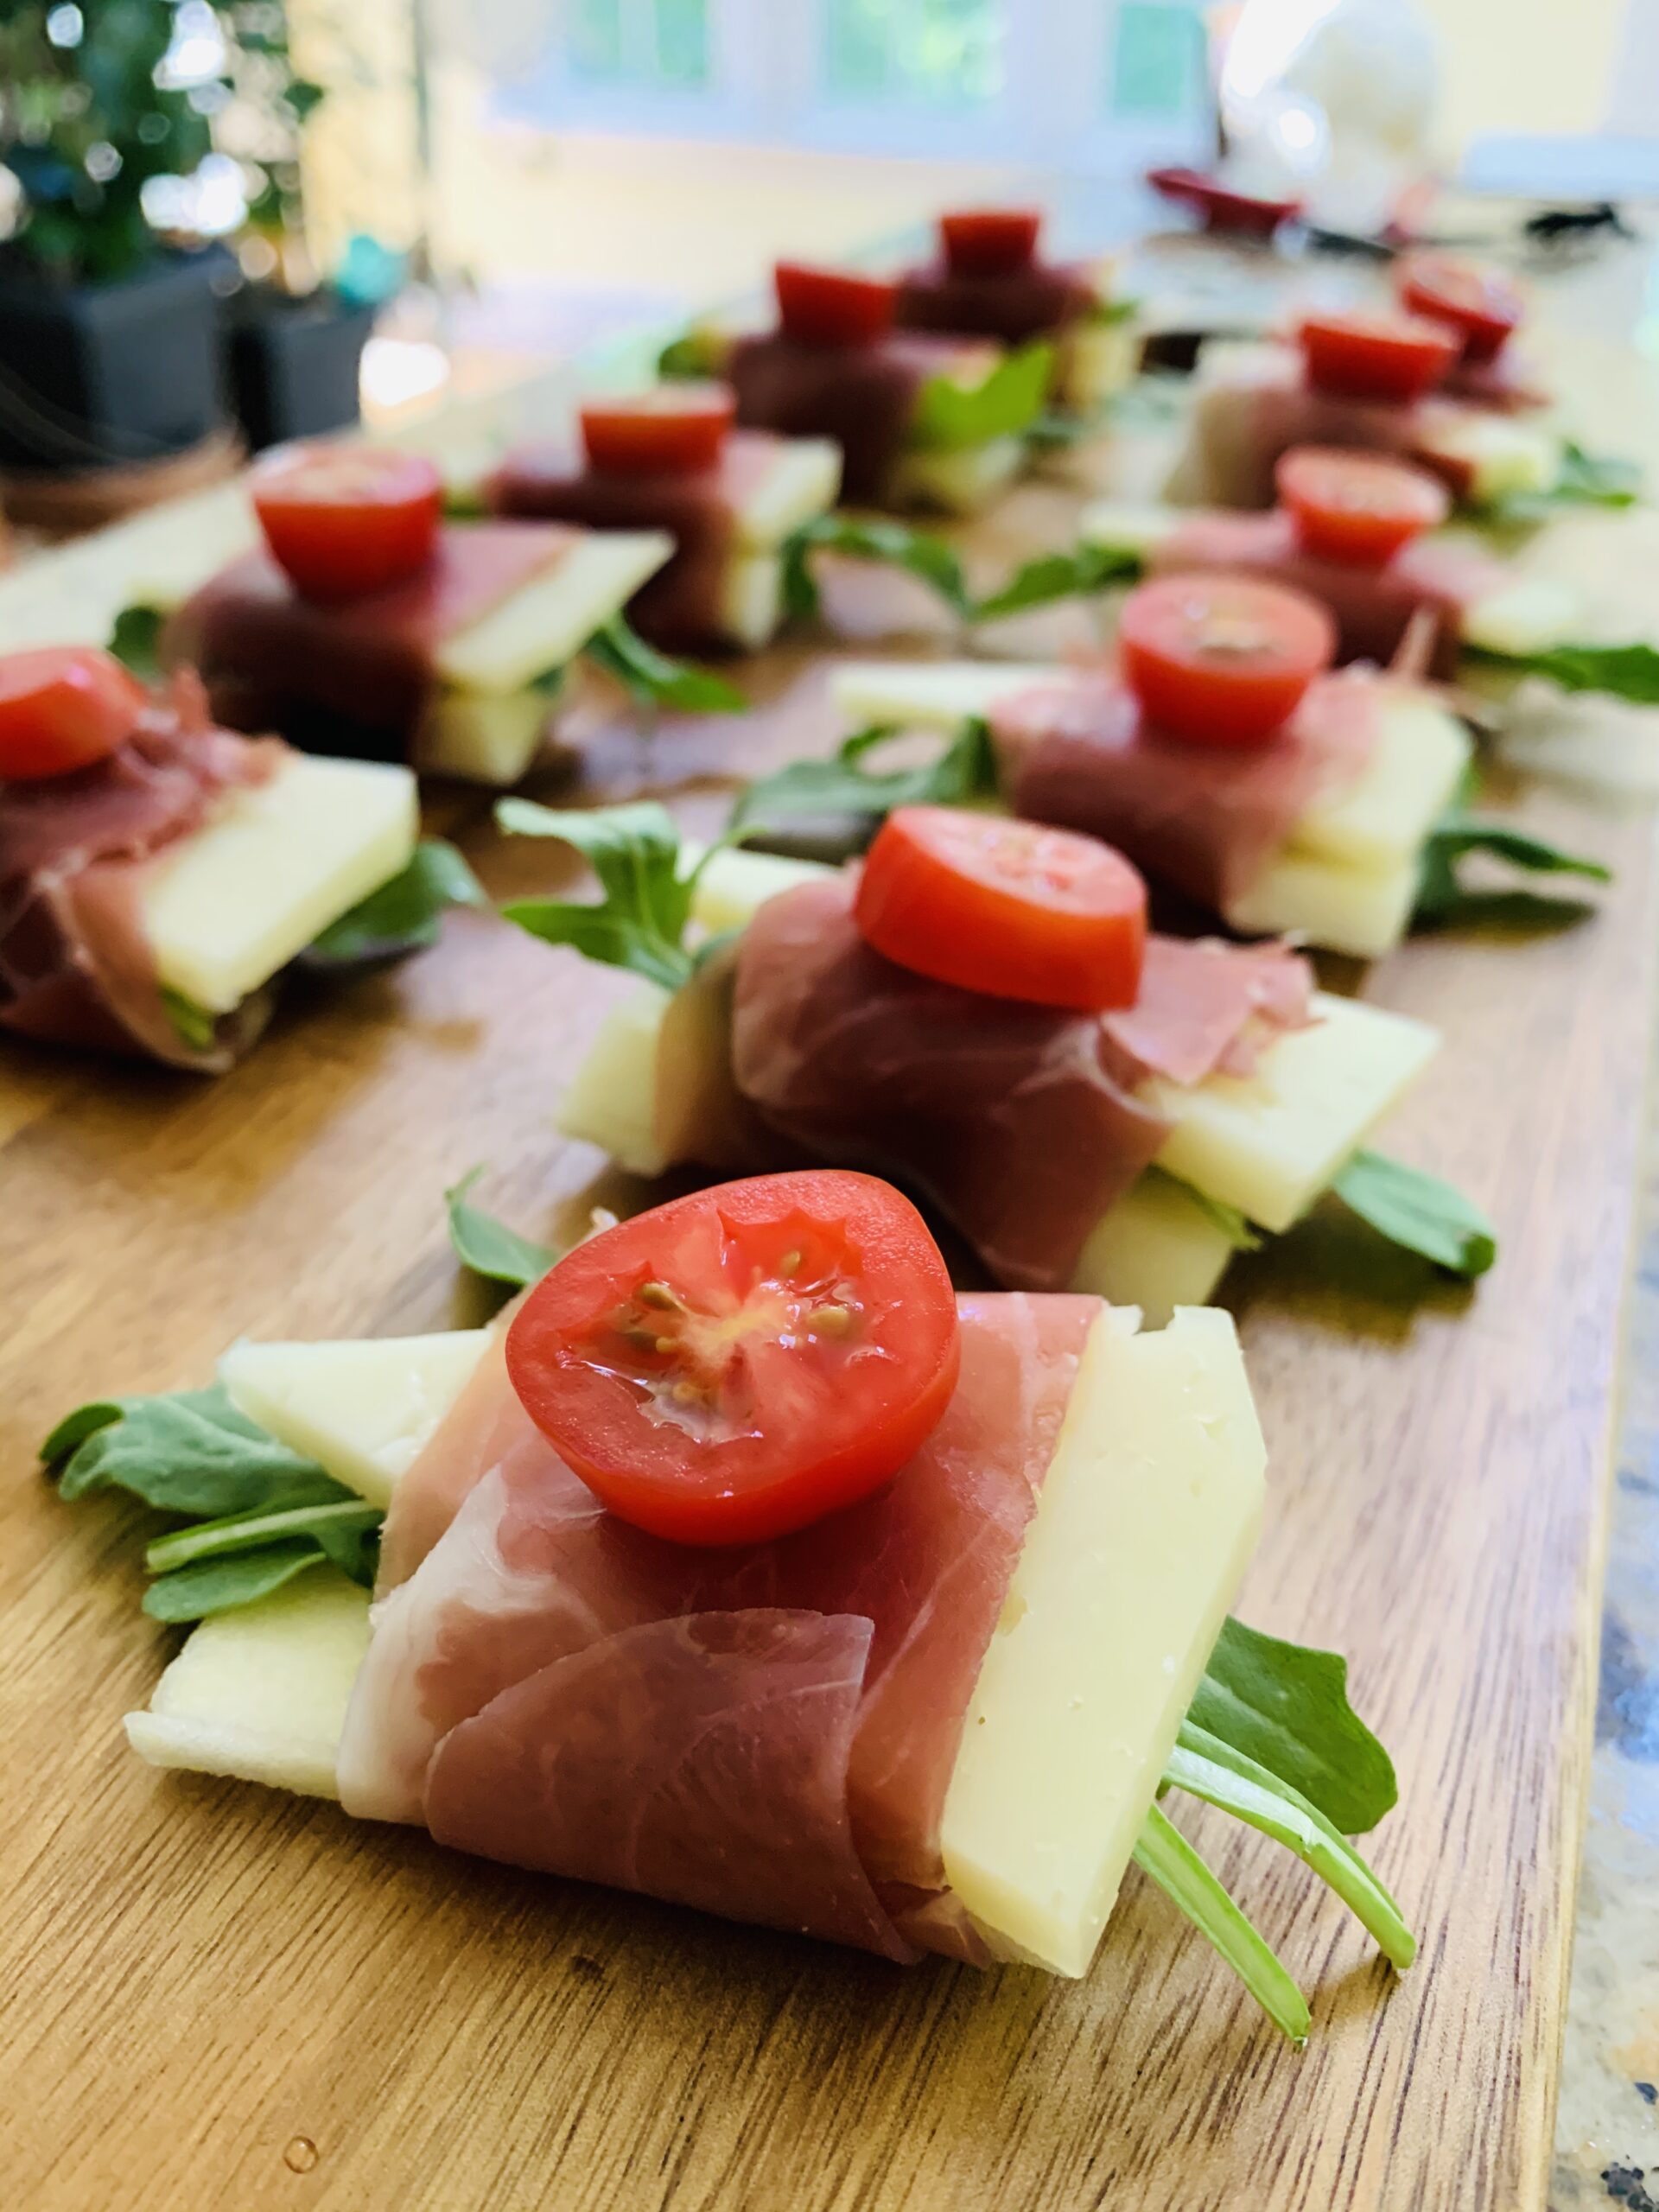 Quick Prosciutto Manchego Apple Stacks: Results of a Forage in the Fridge